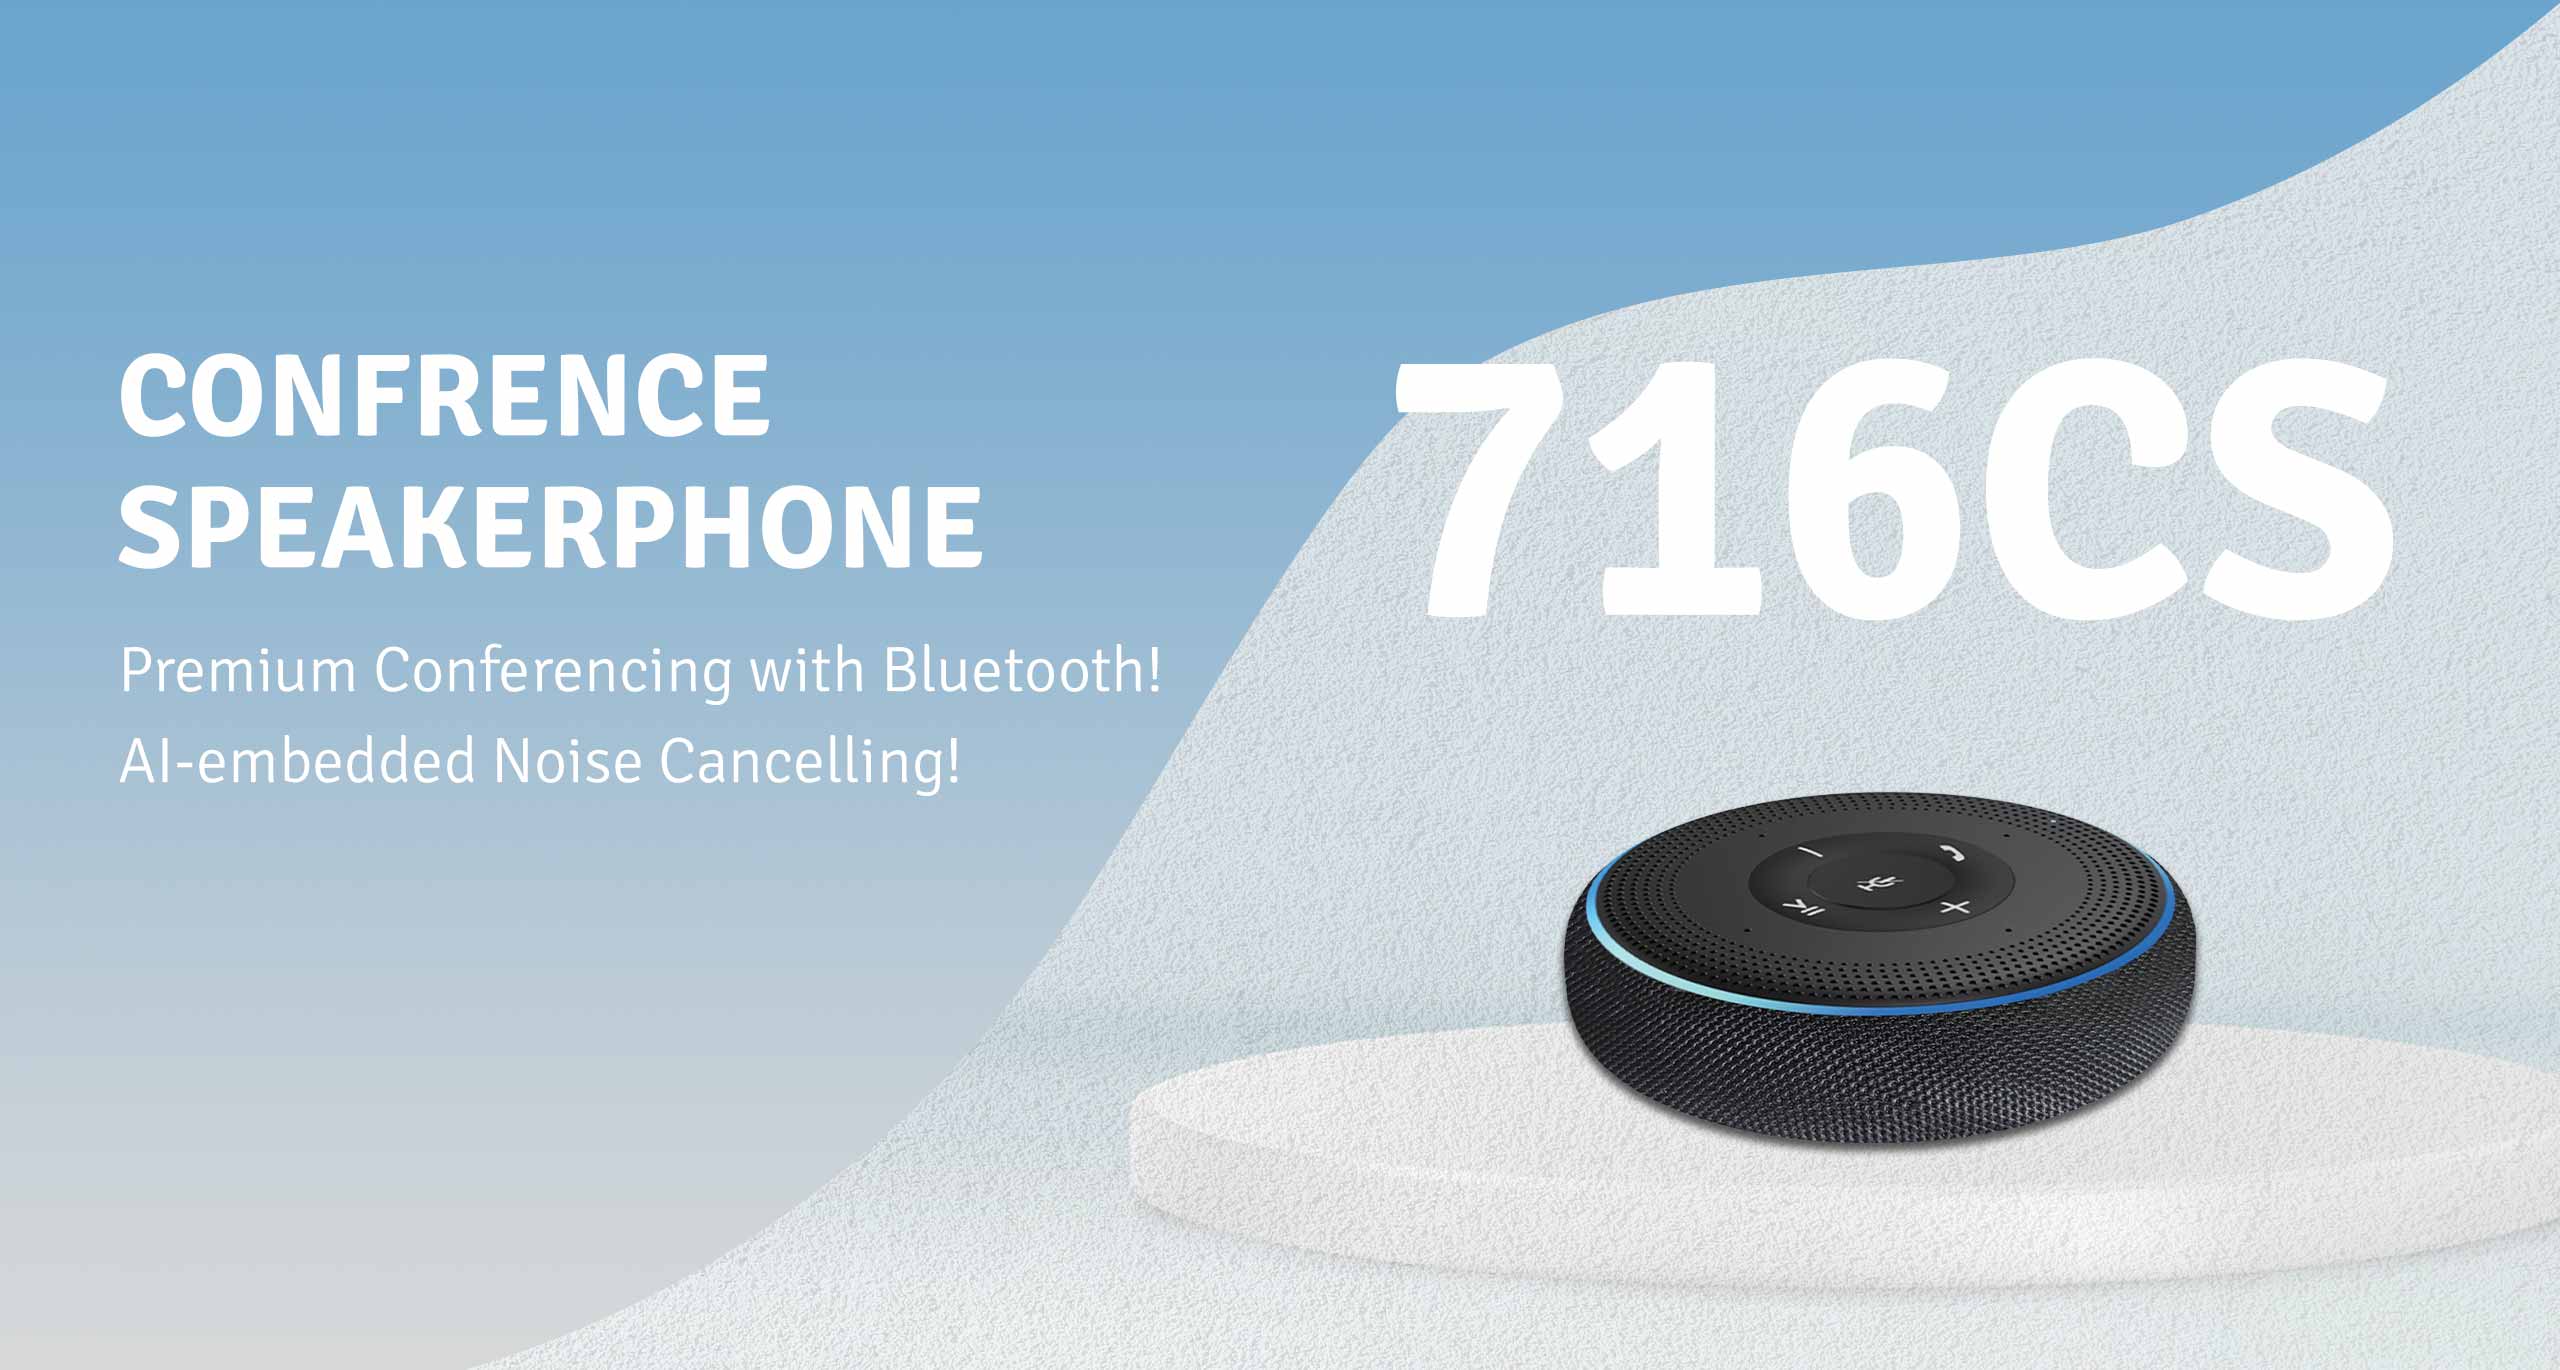 LIVEY 716CS Conference Speakerphone, AI embedded noise cancelling